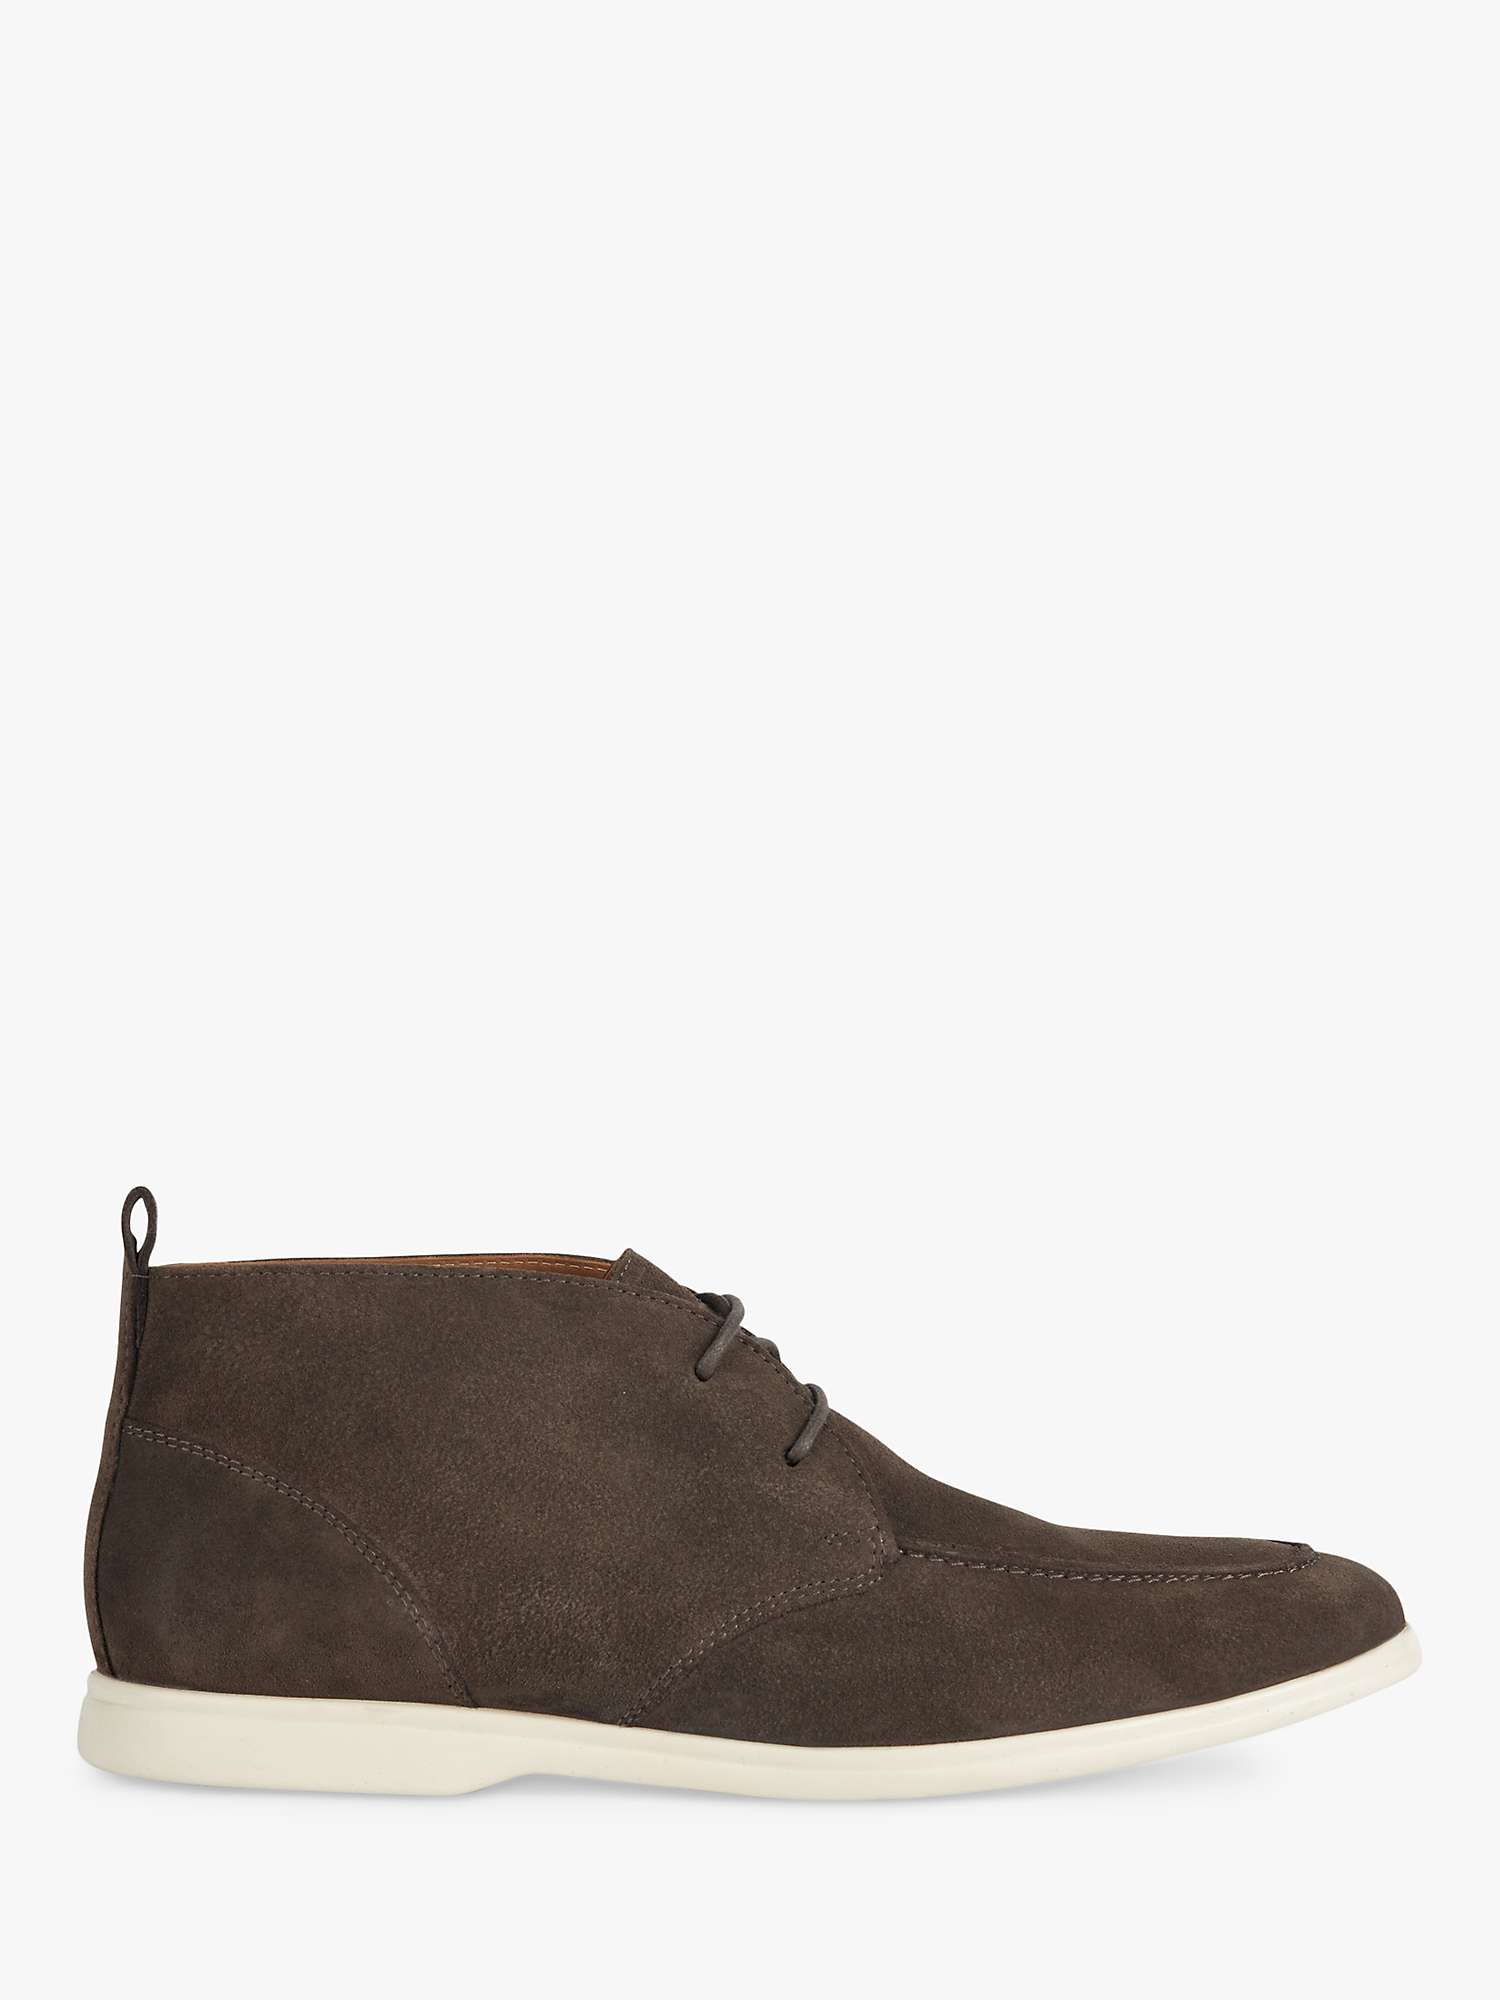 Buy Geox Venzone Suede Chukka Boots Online at johnlewis.com